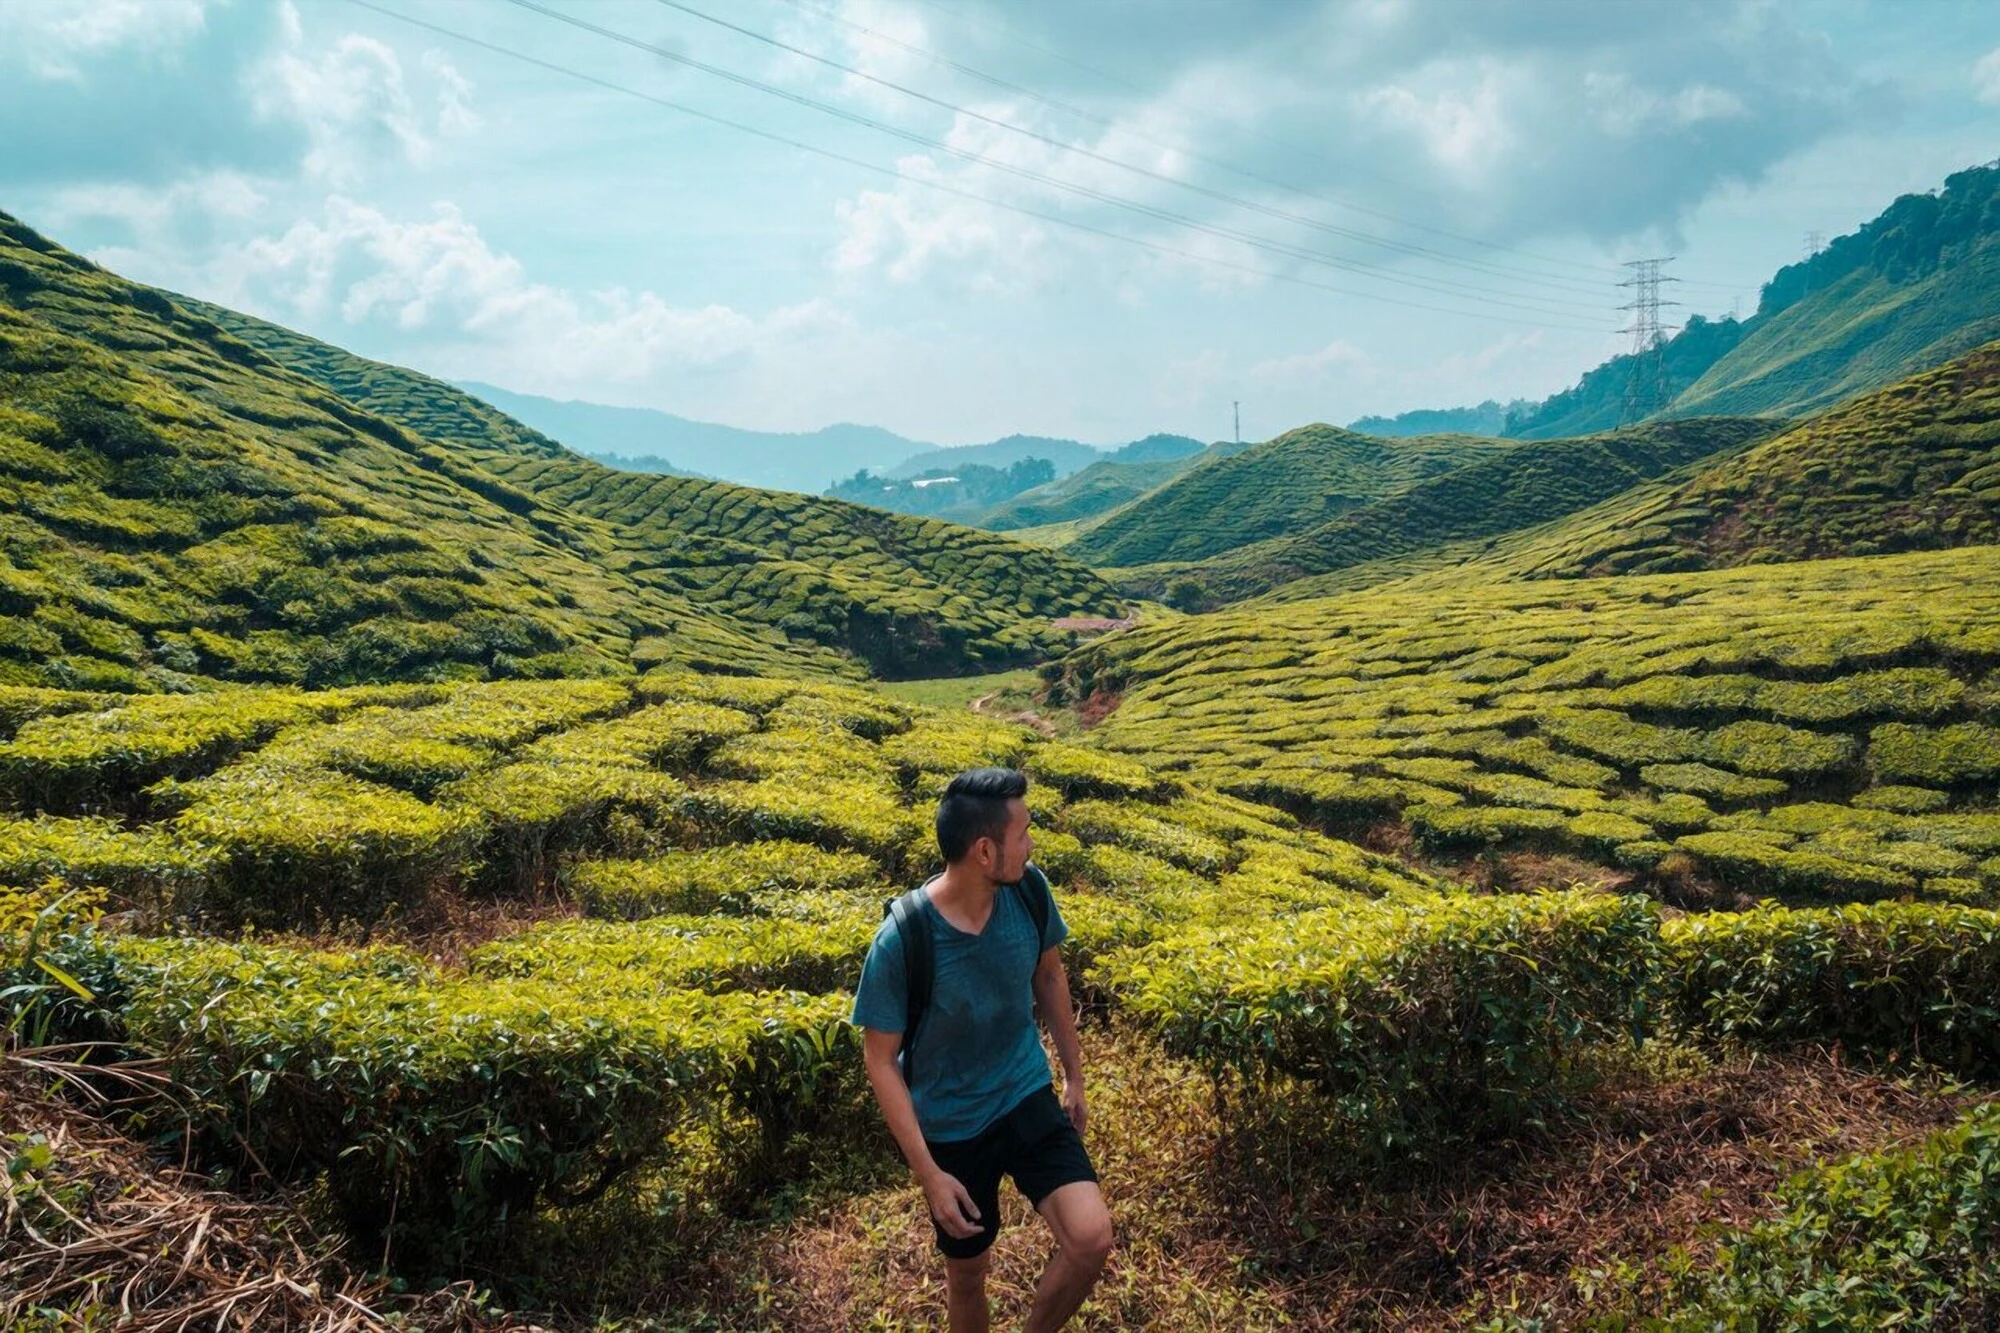 7 Awesome Things to Do in Cameron Highlands, Malaysia for First-Timers - A Complete Guide to Backpacking Cameron Highlands